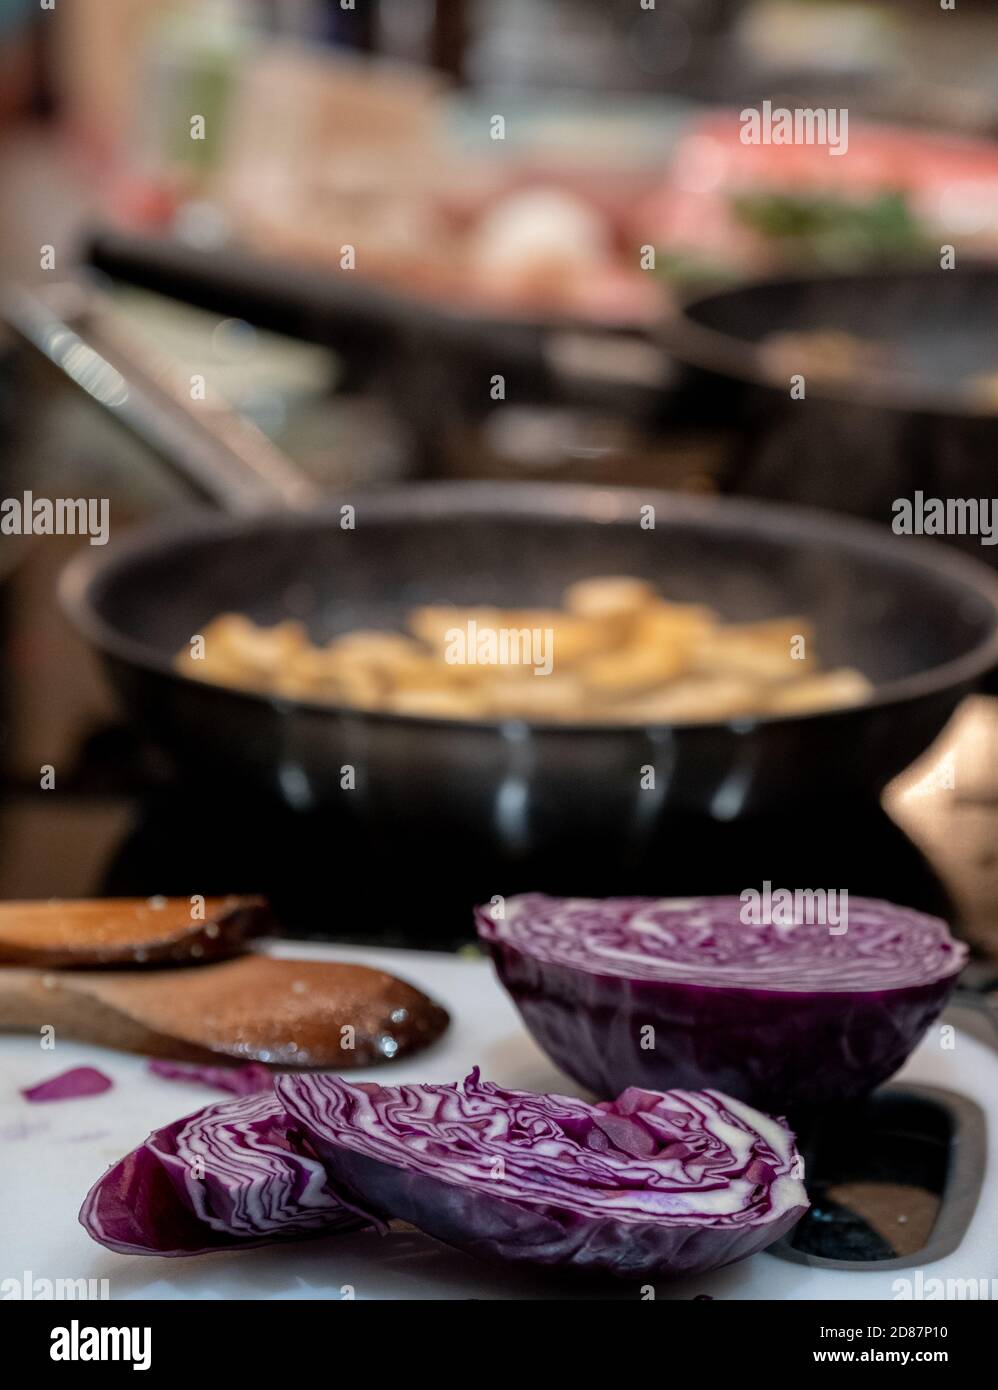 Preparing a vegan Asian Pad Thai stir fry with red cabbage, aubergine, tofu and noodles. Stock Photo